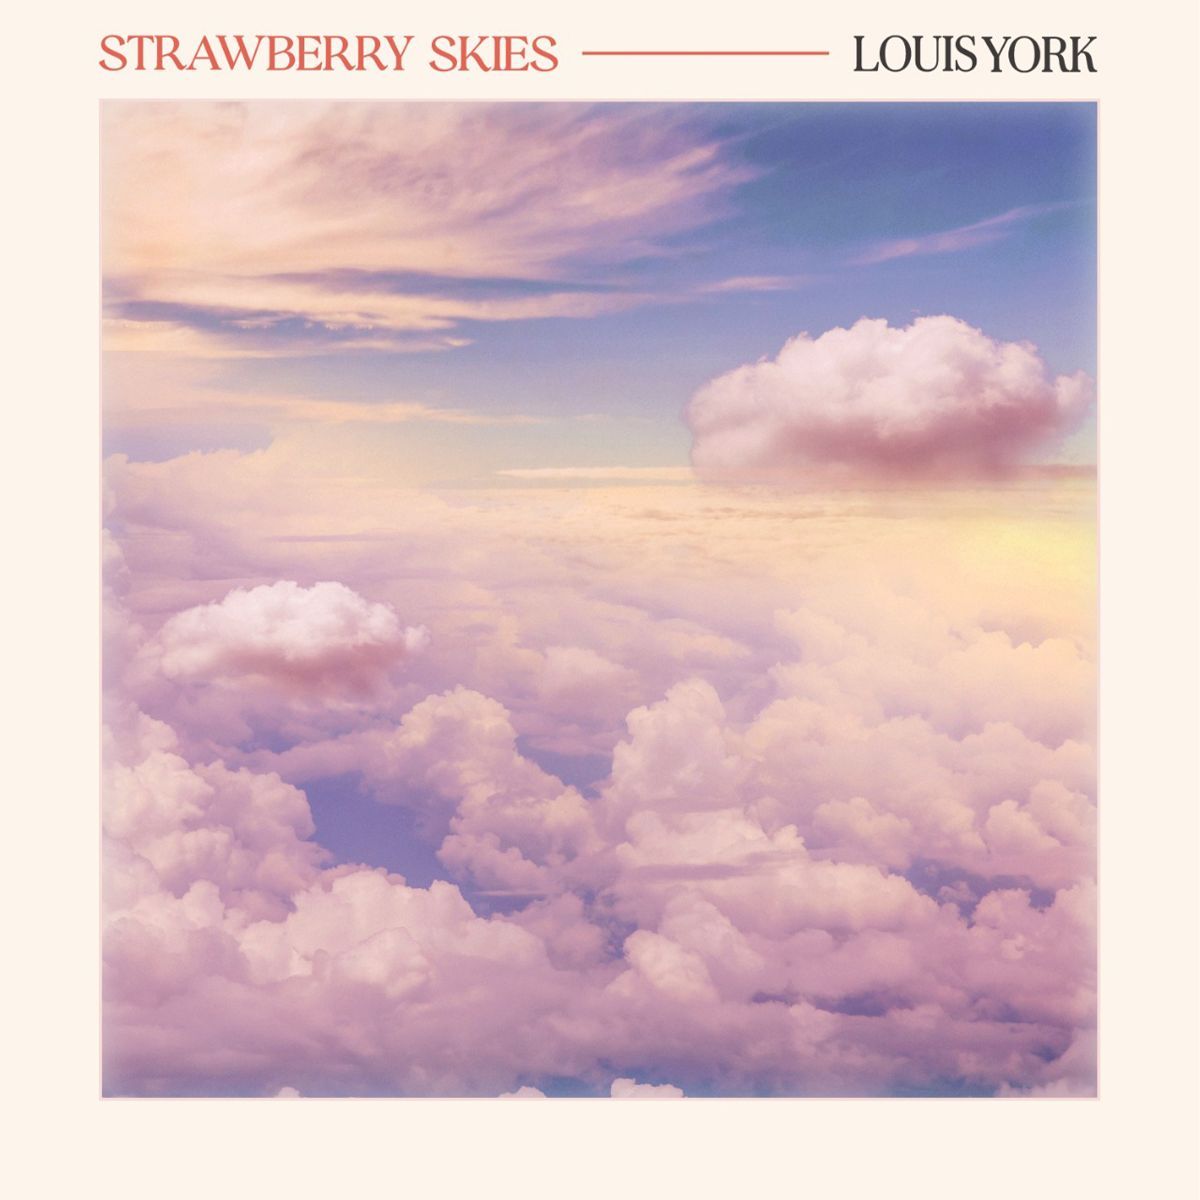 Louis York's Strawberry Skies album cover with a pink and blue sky filled with clouds - Polaroid